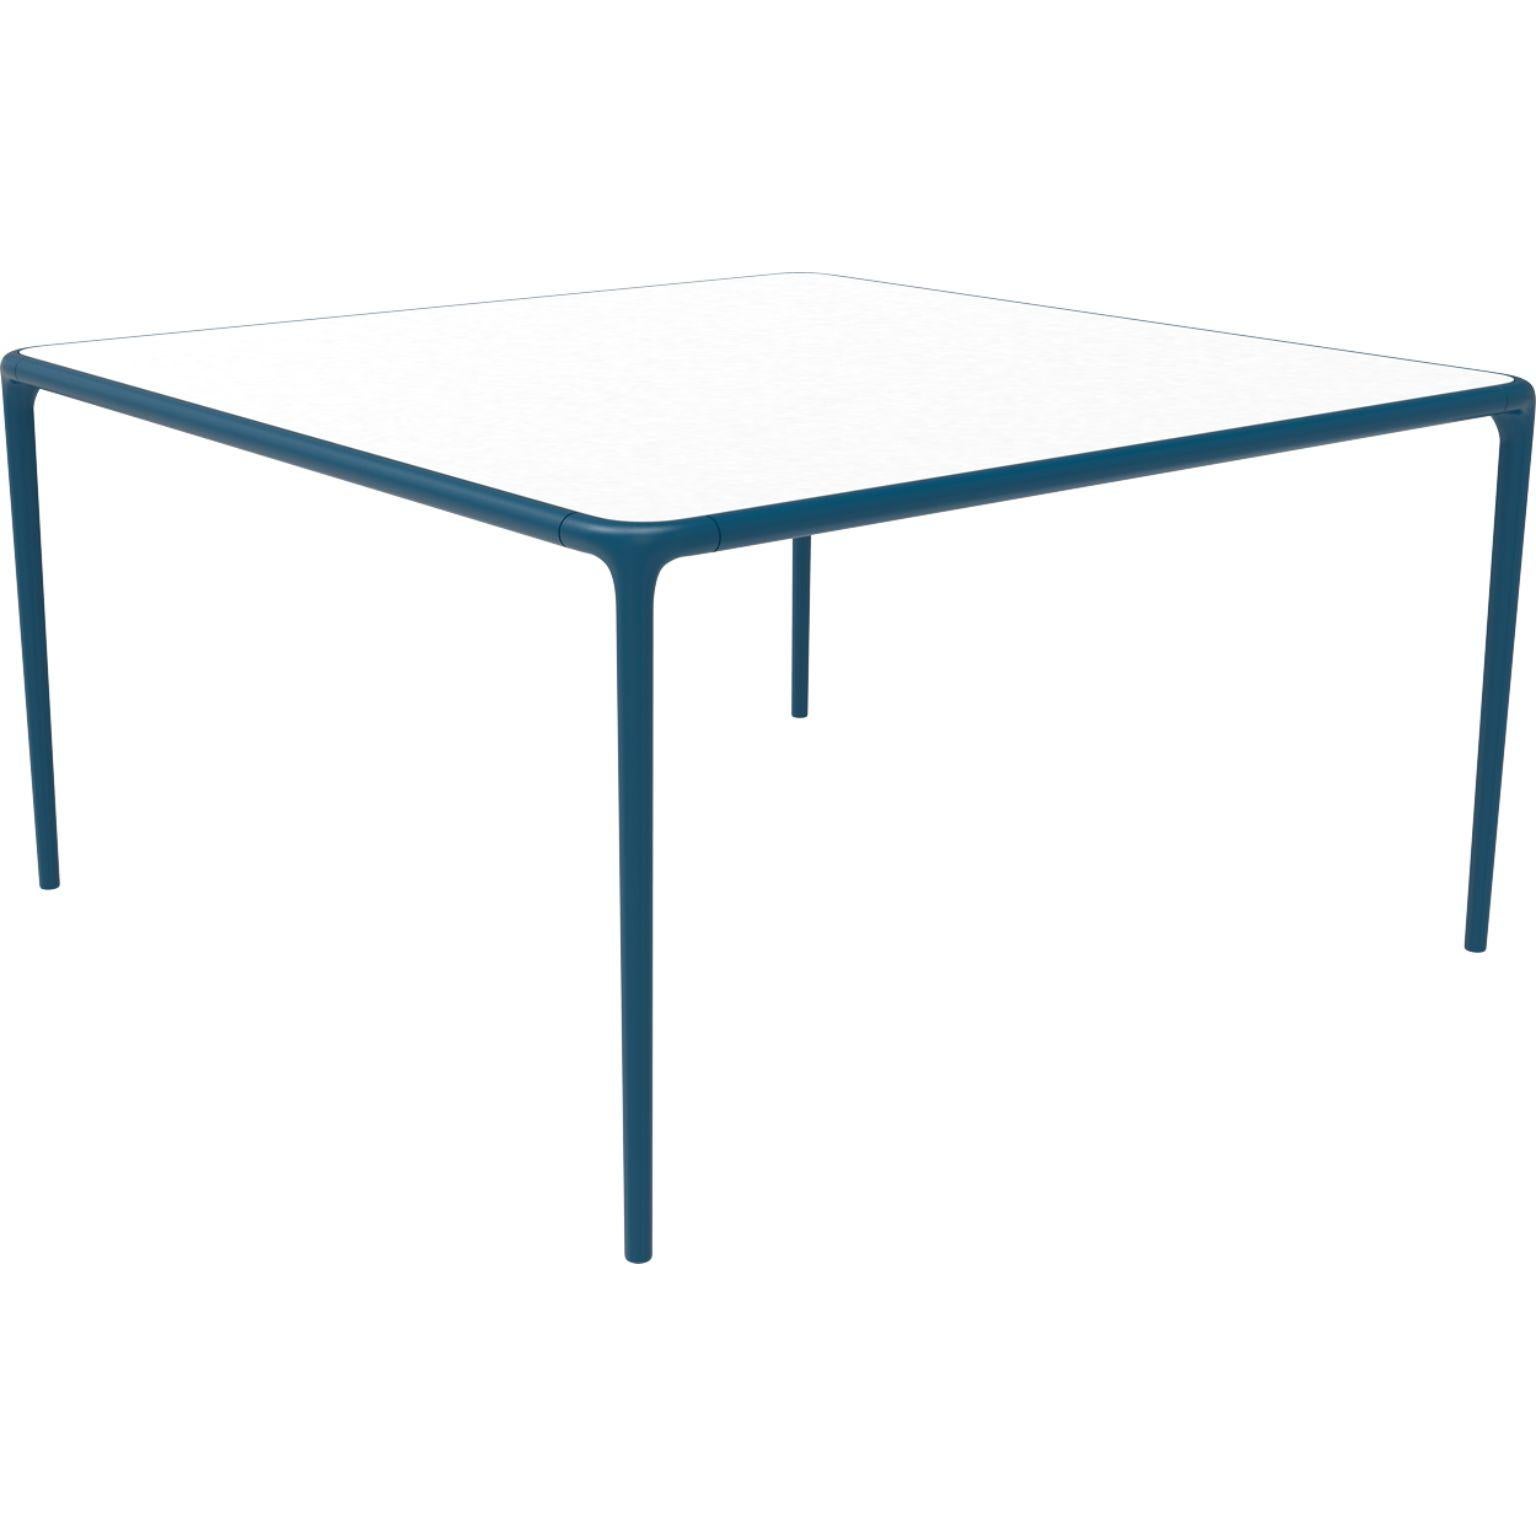 Xaloc navy glass top table 140 by MOWEE
Dimensions: D140 x W140 x H74 cm
Material: Aluminum, tinted tempered glass top.
Also available in different aluminum colors and finishes (HPL Black Edge or Neolith). 

Xaloc synthesizes the lines of